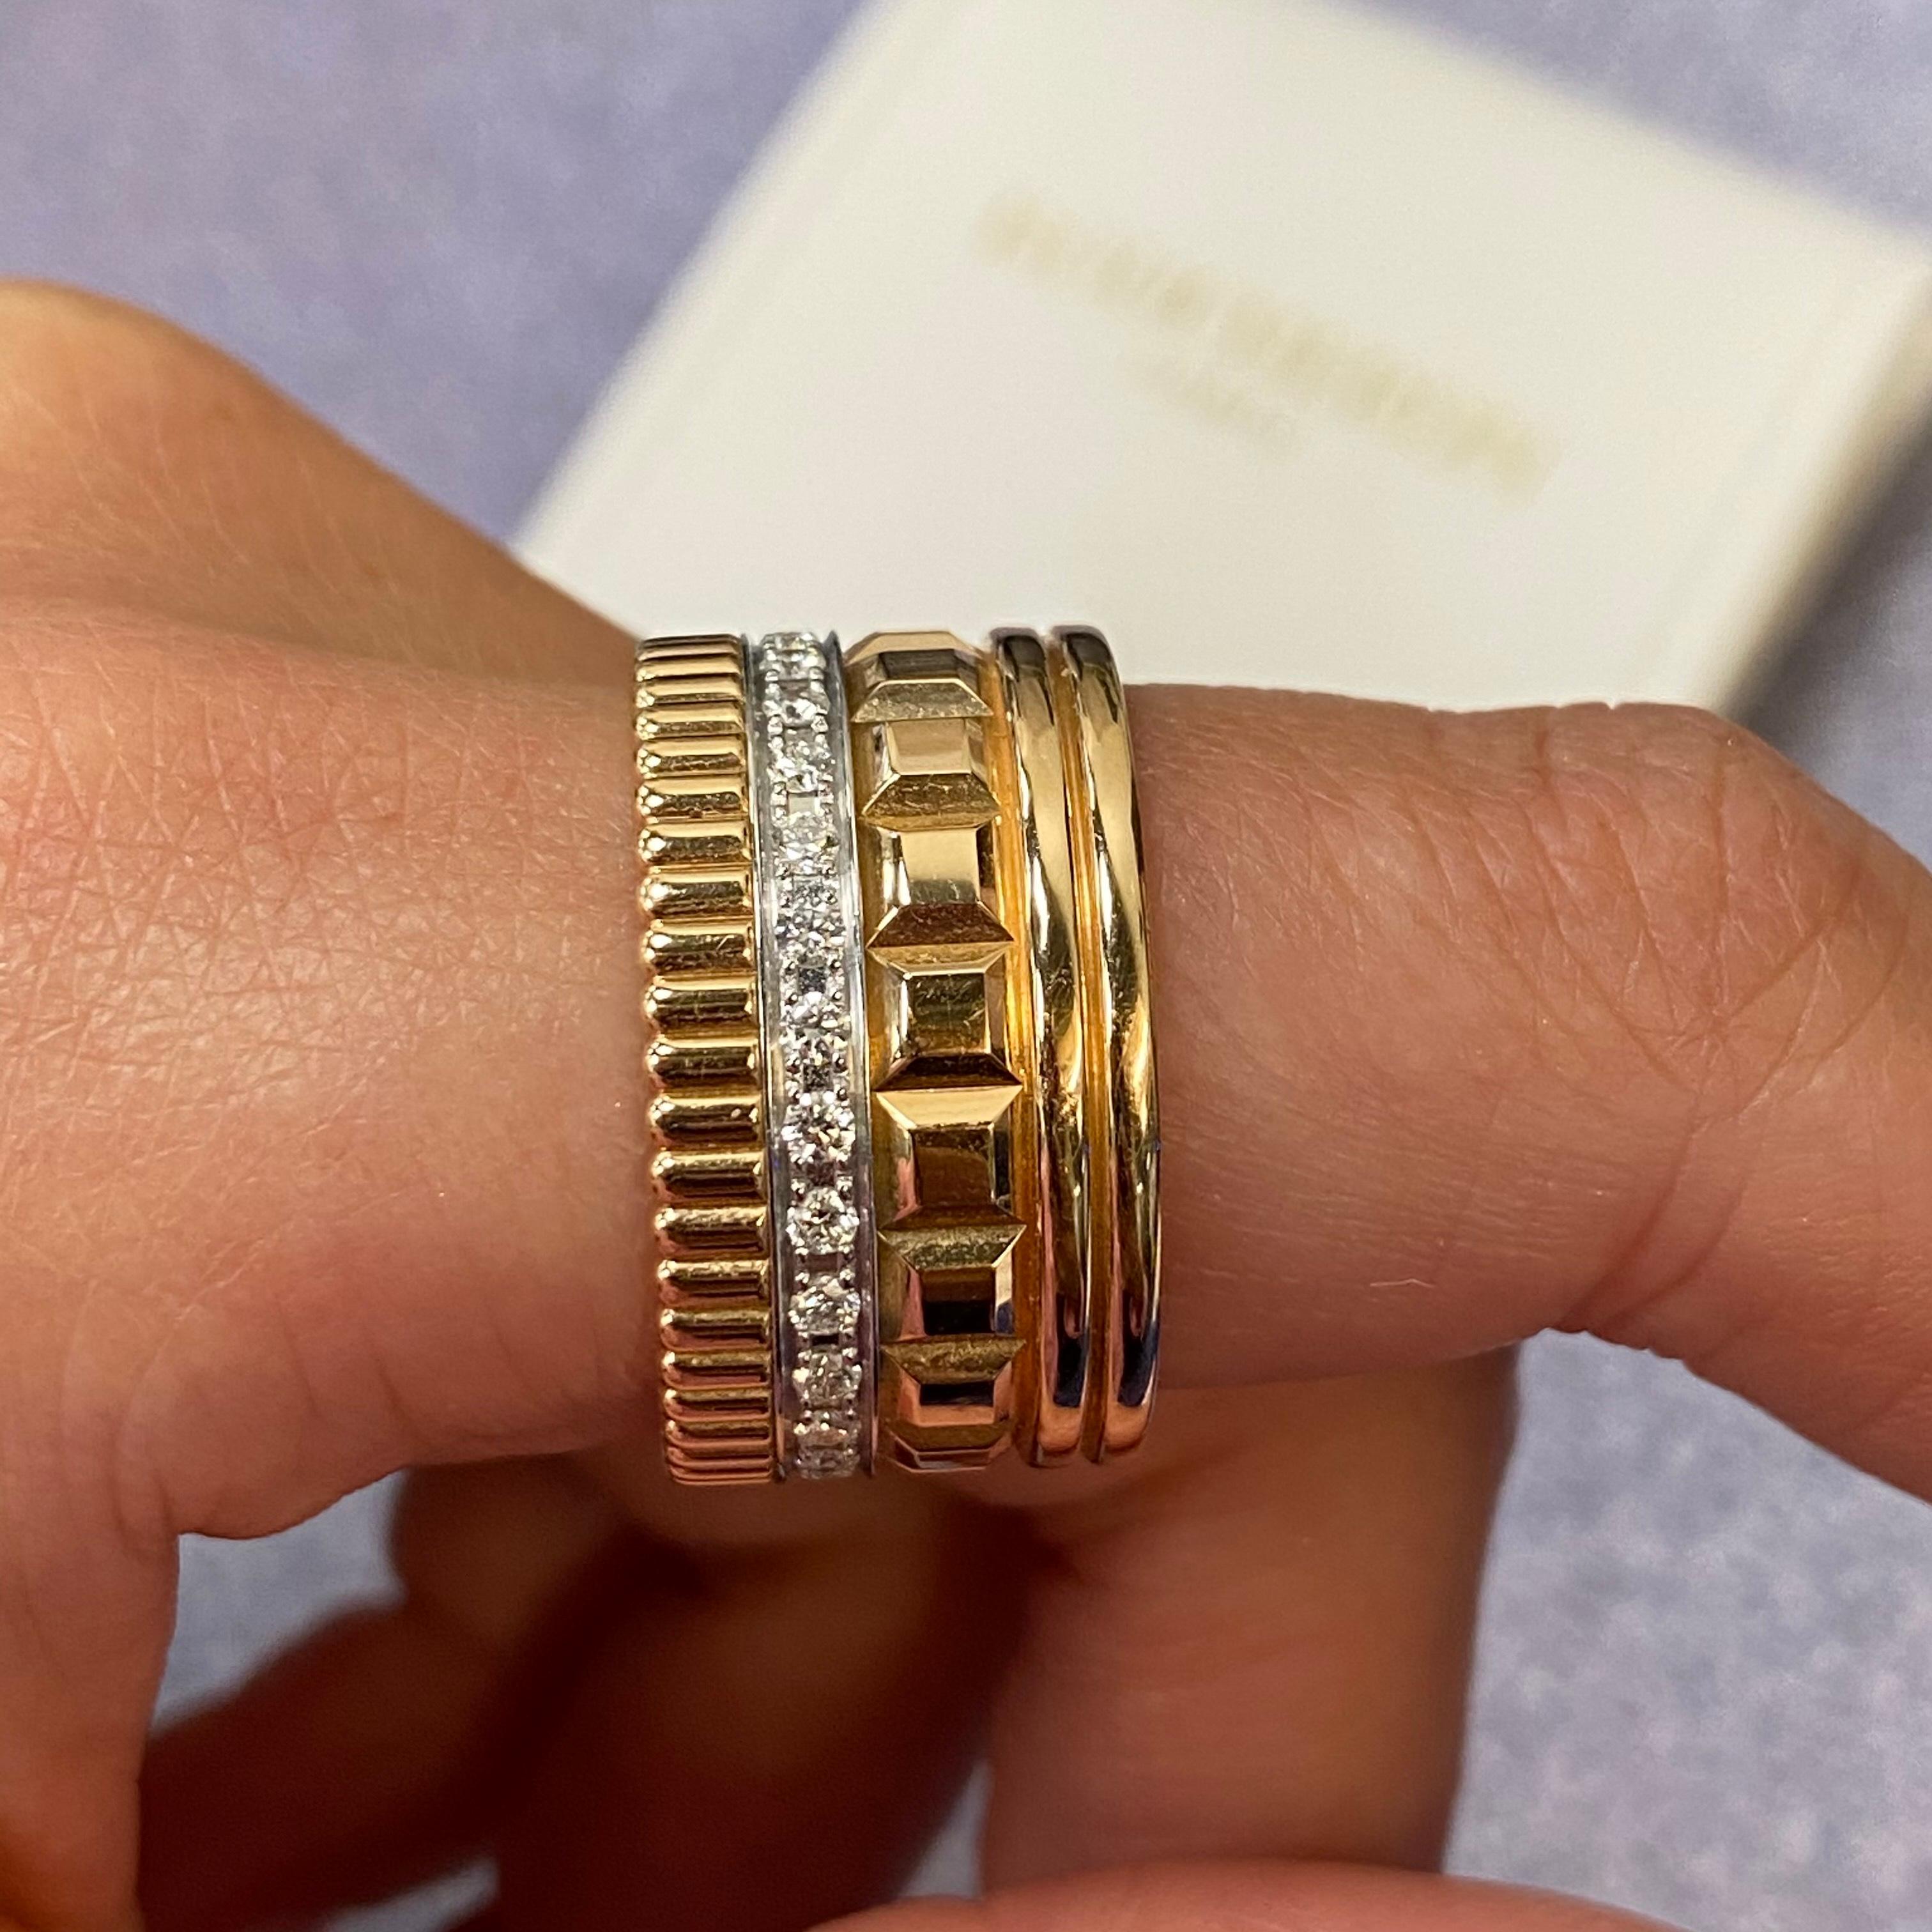 This Boucheron ring was created in celebration of the boutique’s 120 years on the Place Vendôme and its historical cobblestones, this ring radiates the light and energy sent by the Hôtel Particulier chosen by Frédéric Boucheron for its unique